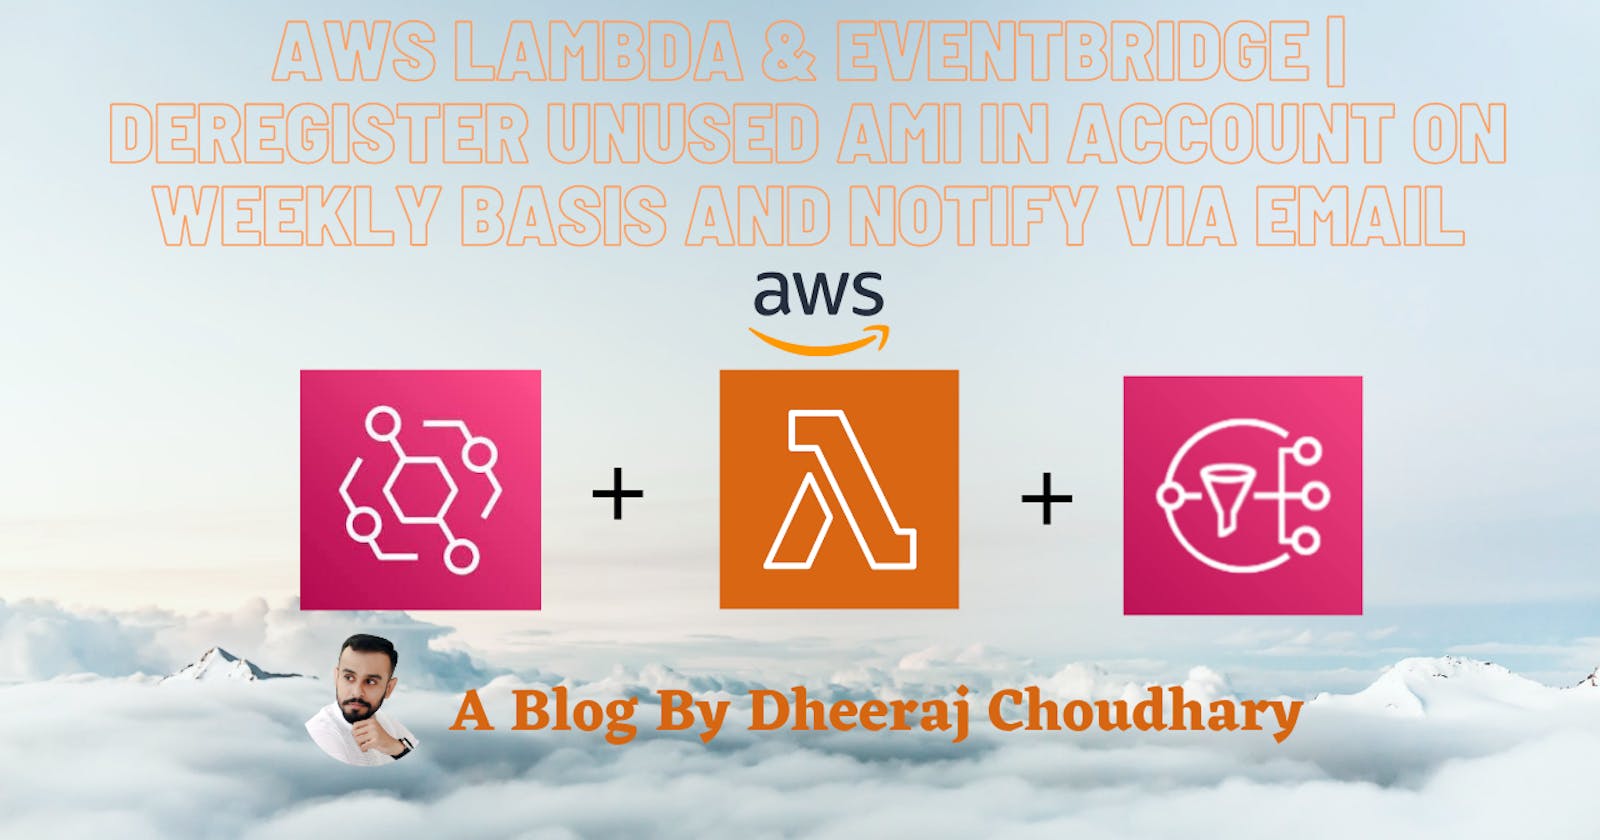 AWS Lambda & EventBridge | Deregister Unused AMI In Account On Weekly Basis And Notify Via Email